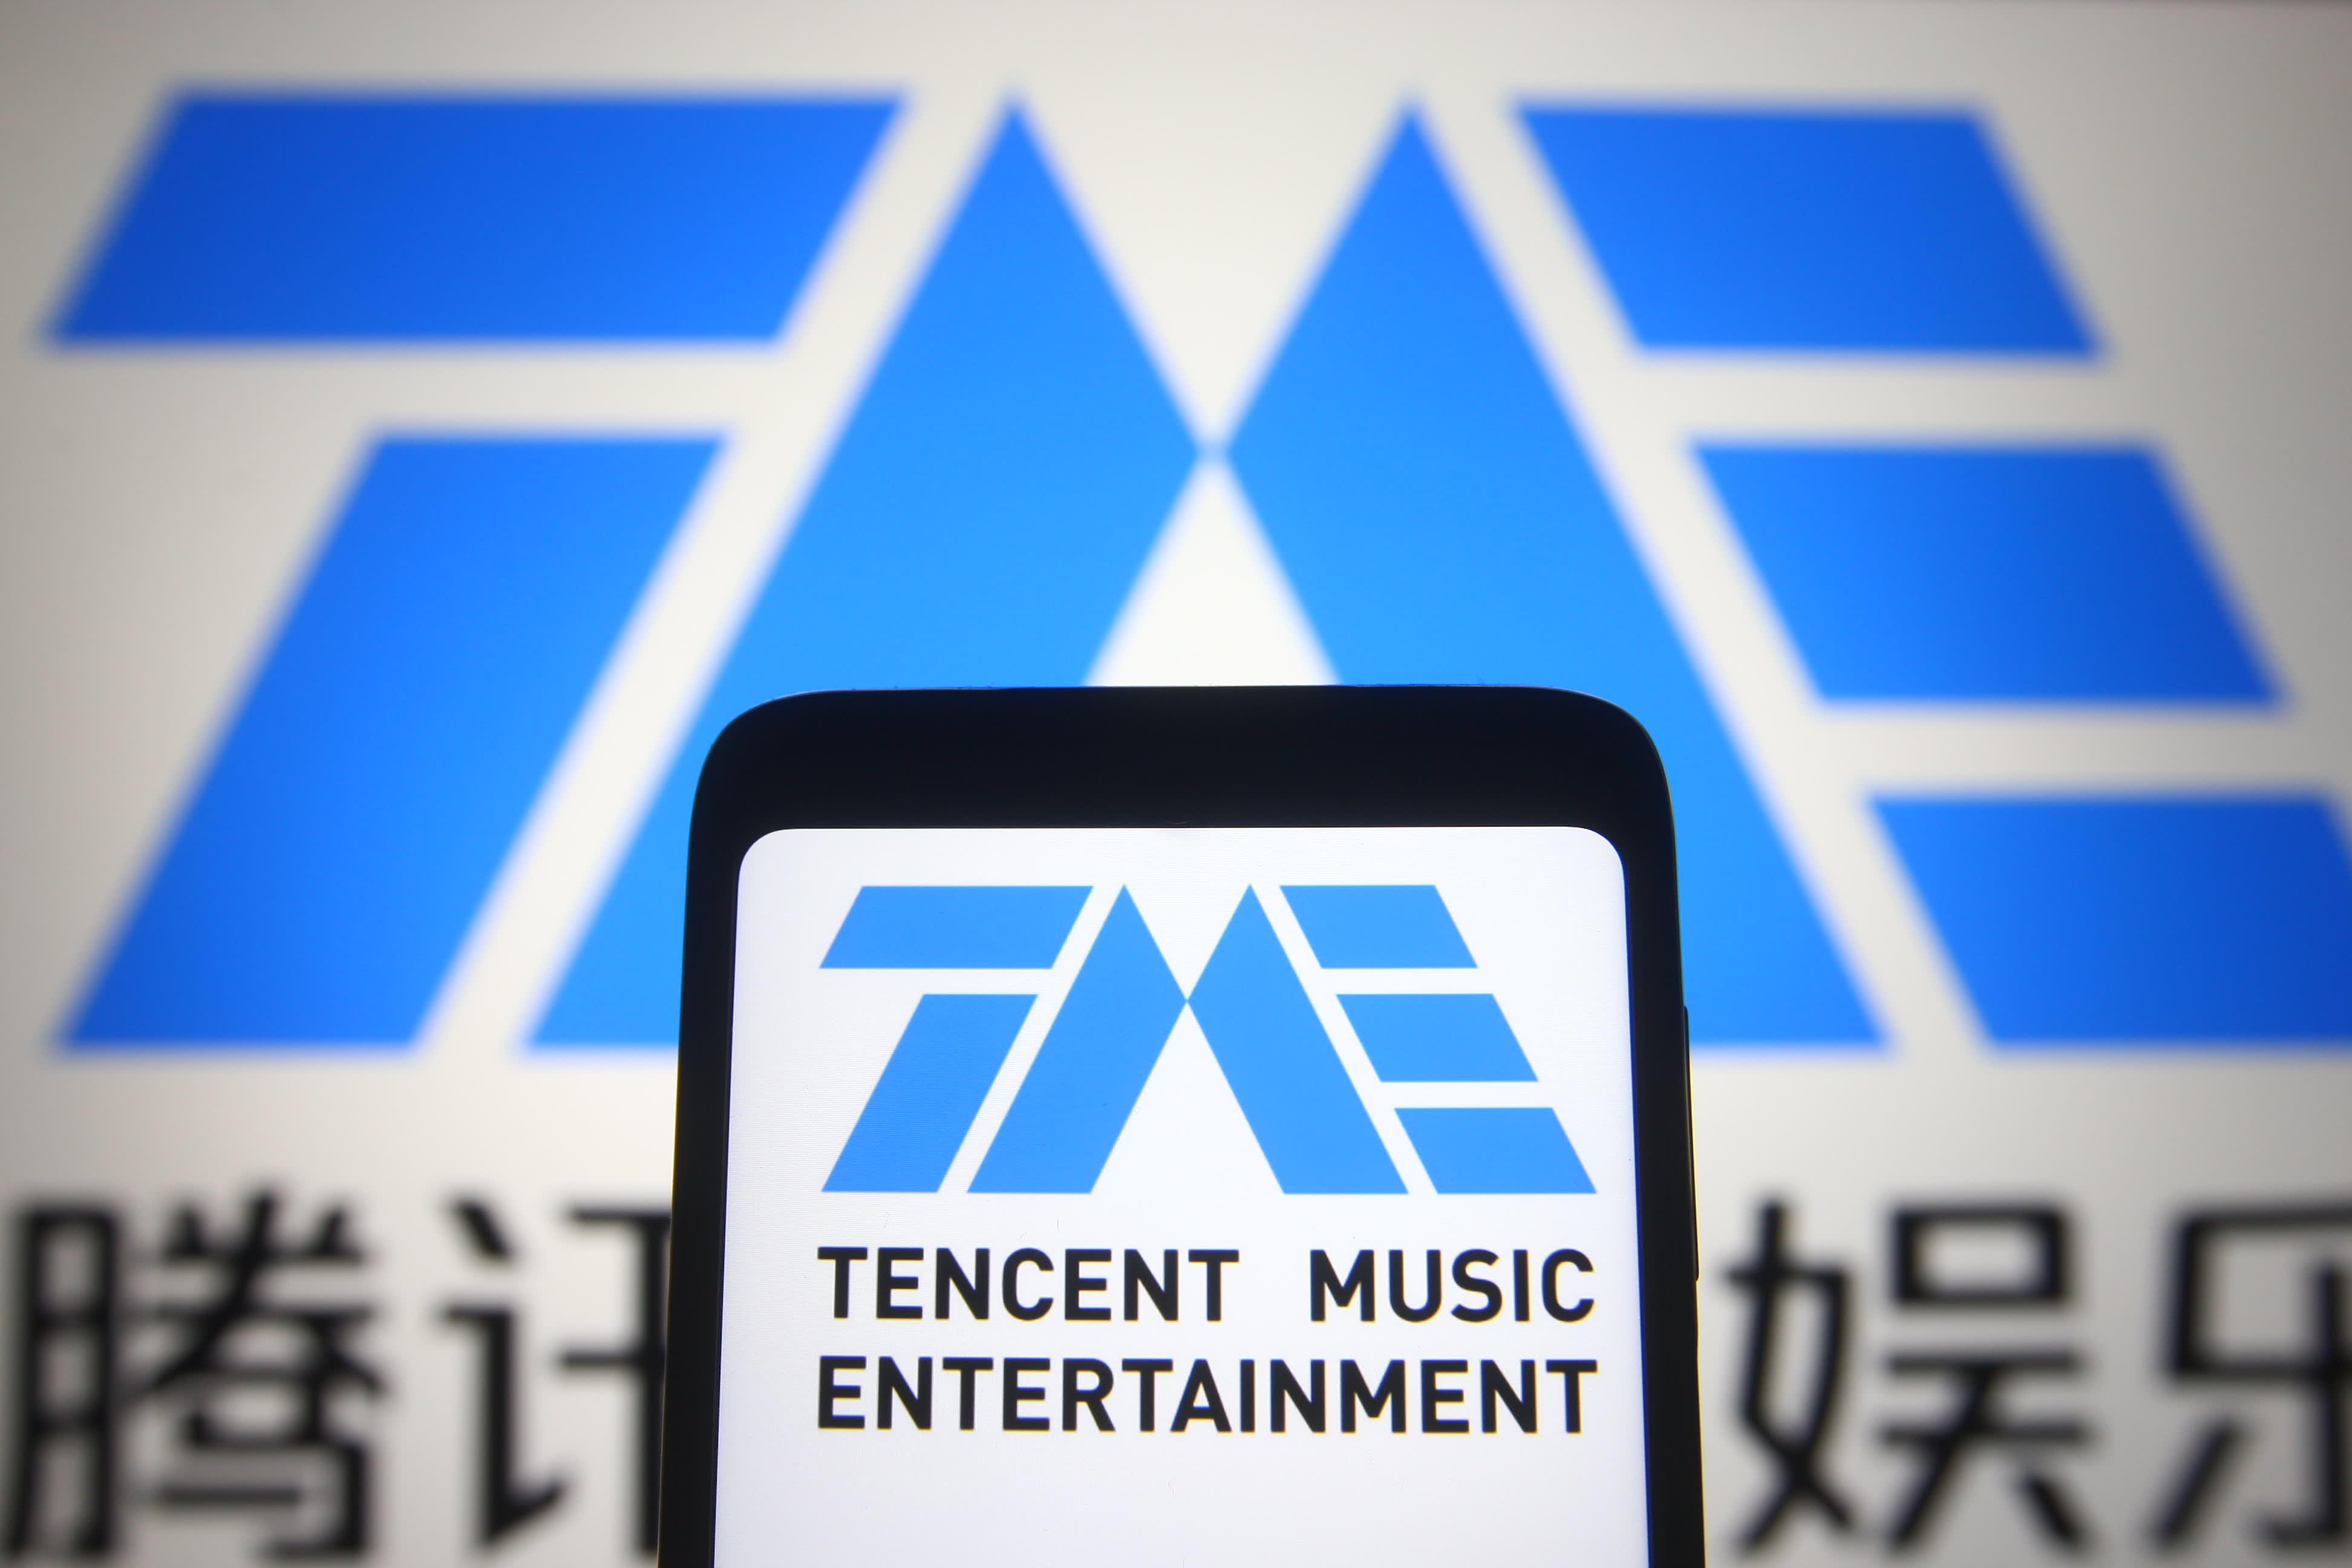 China's antitrust regulator has ordered Tencent to give up its exclusive music licensing rights and slapped a fine on the company for anti-compet